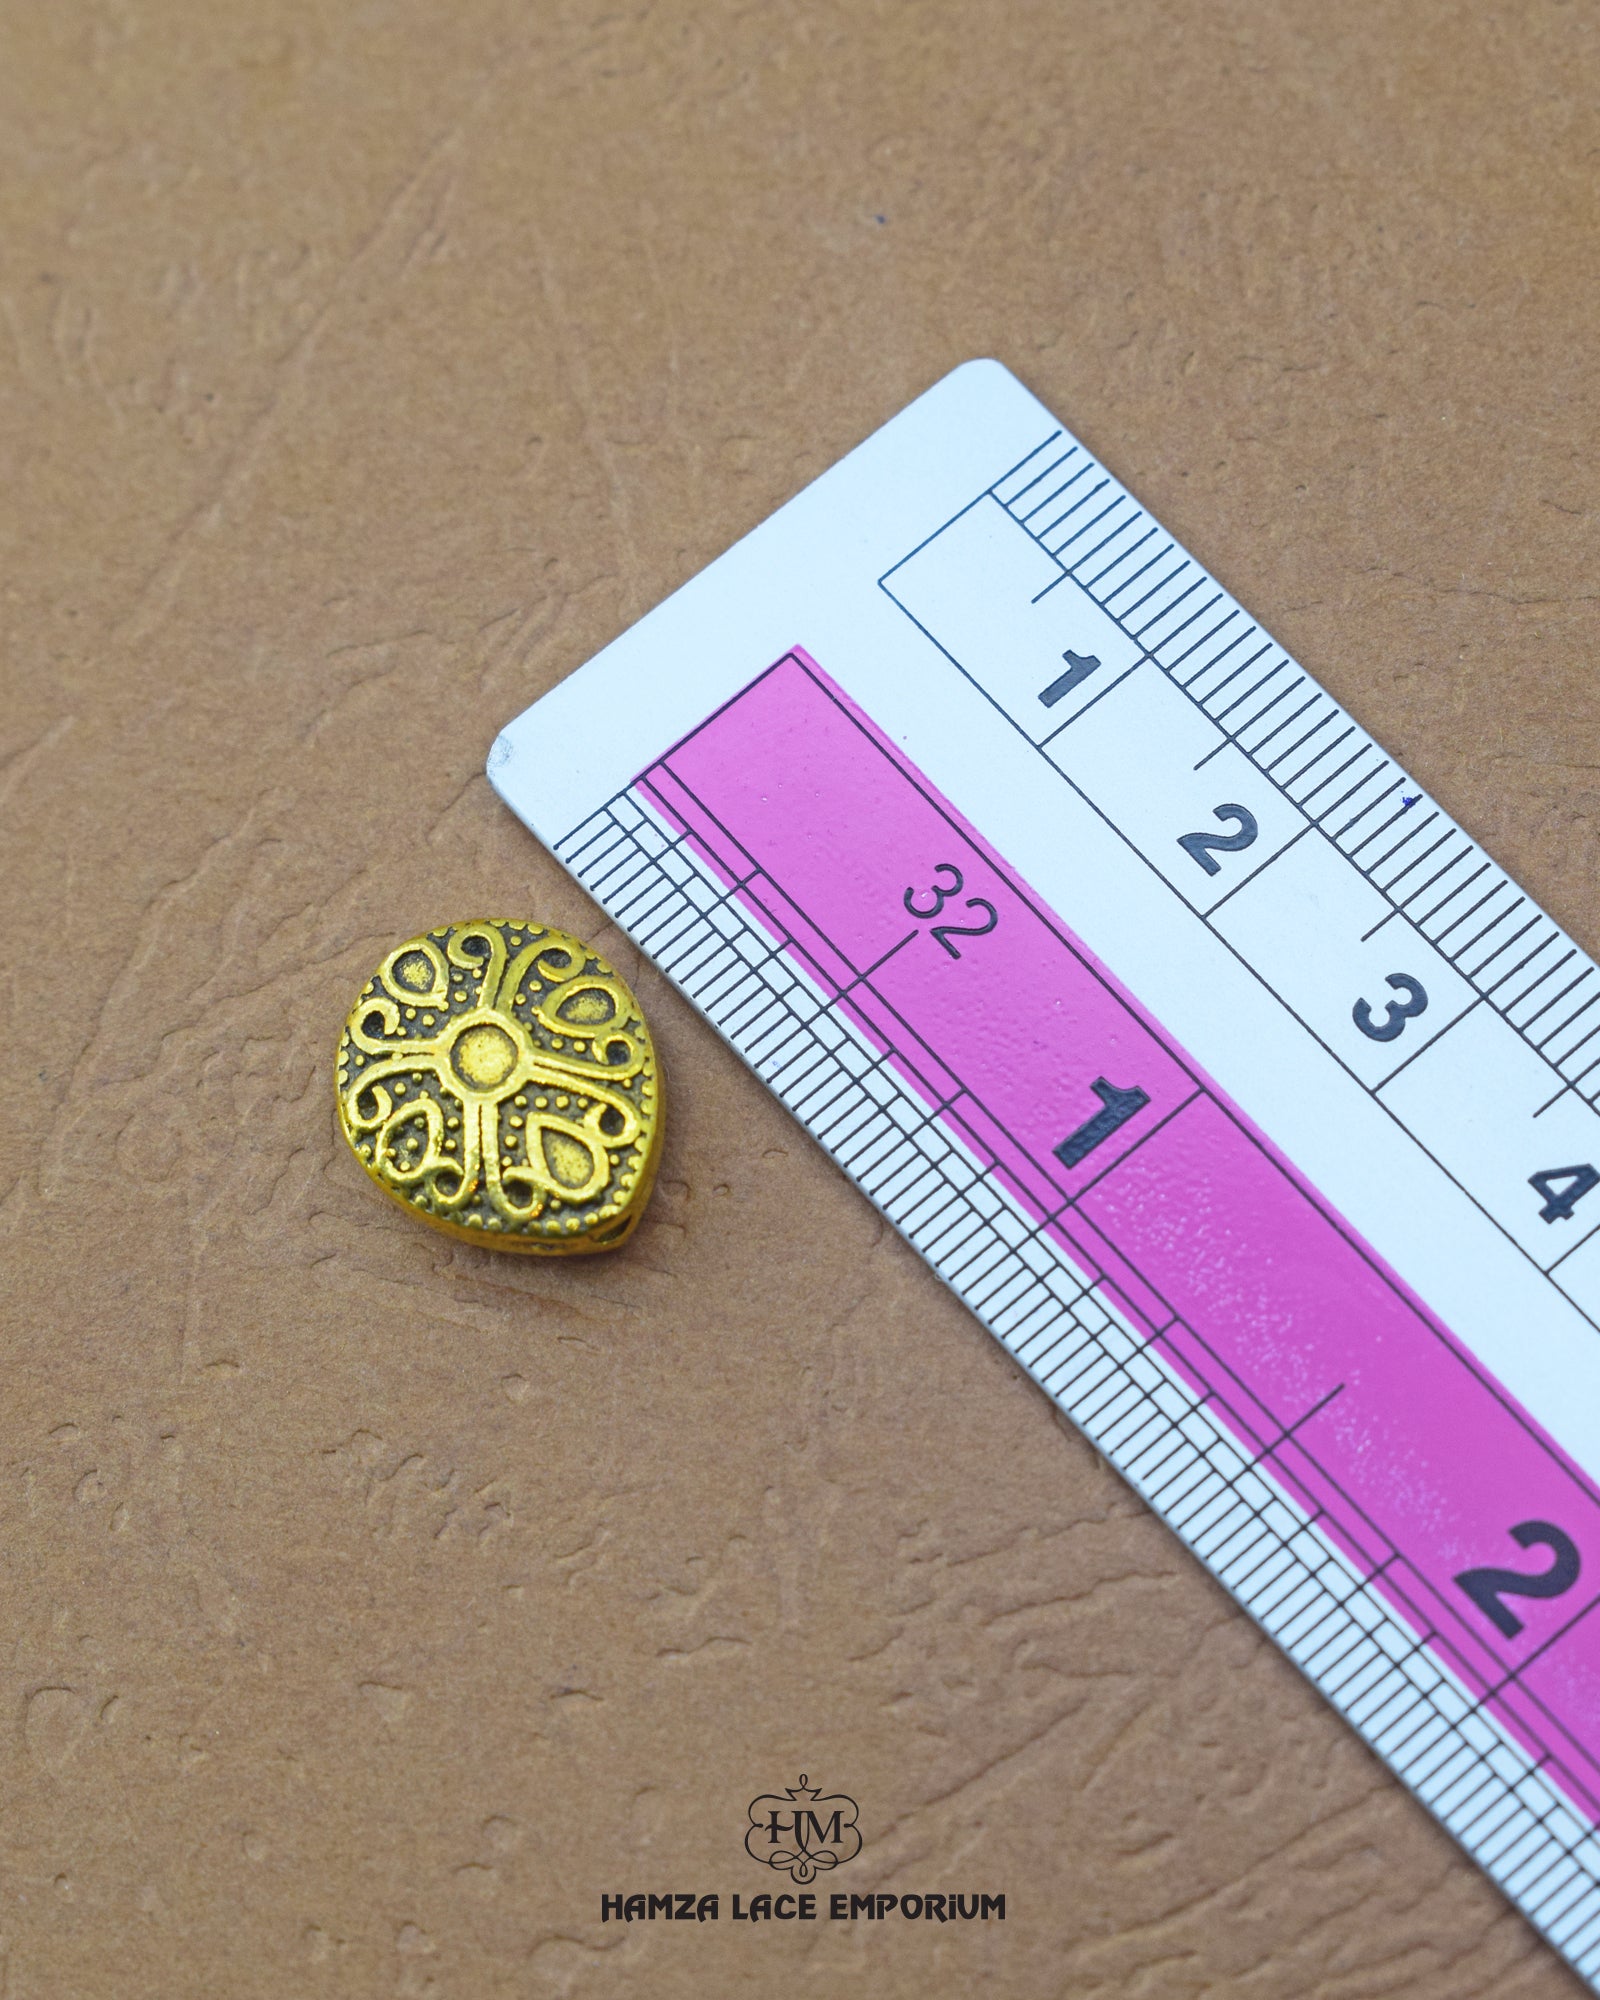 The size of the 'Oval Design Metal Button MA671' is showcased alongside a helpful ruler to visualize and assess the product size accurately.